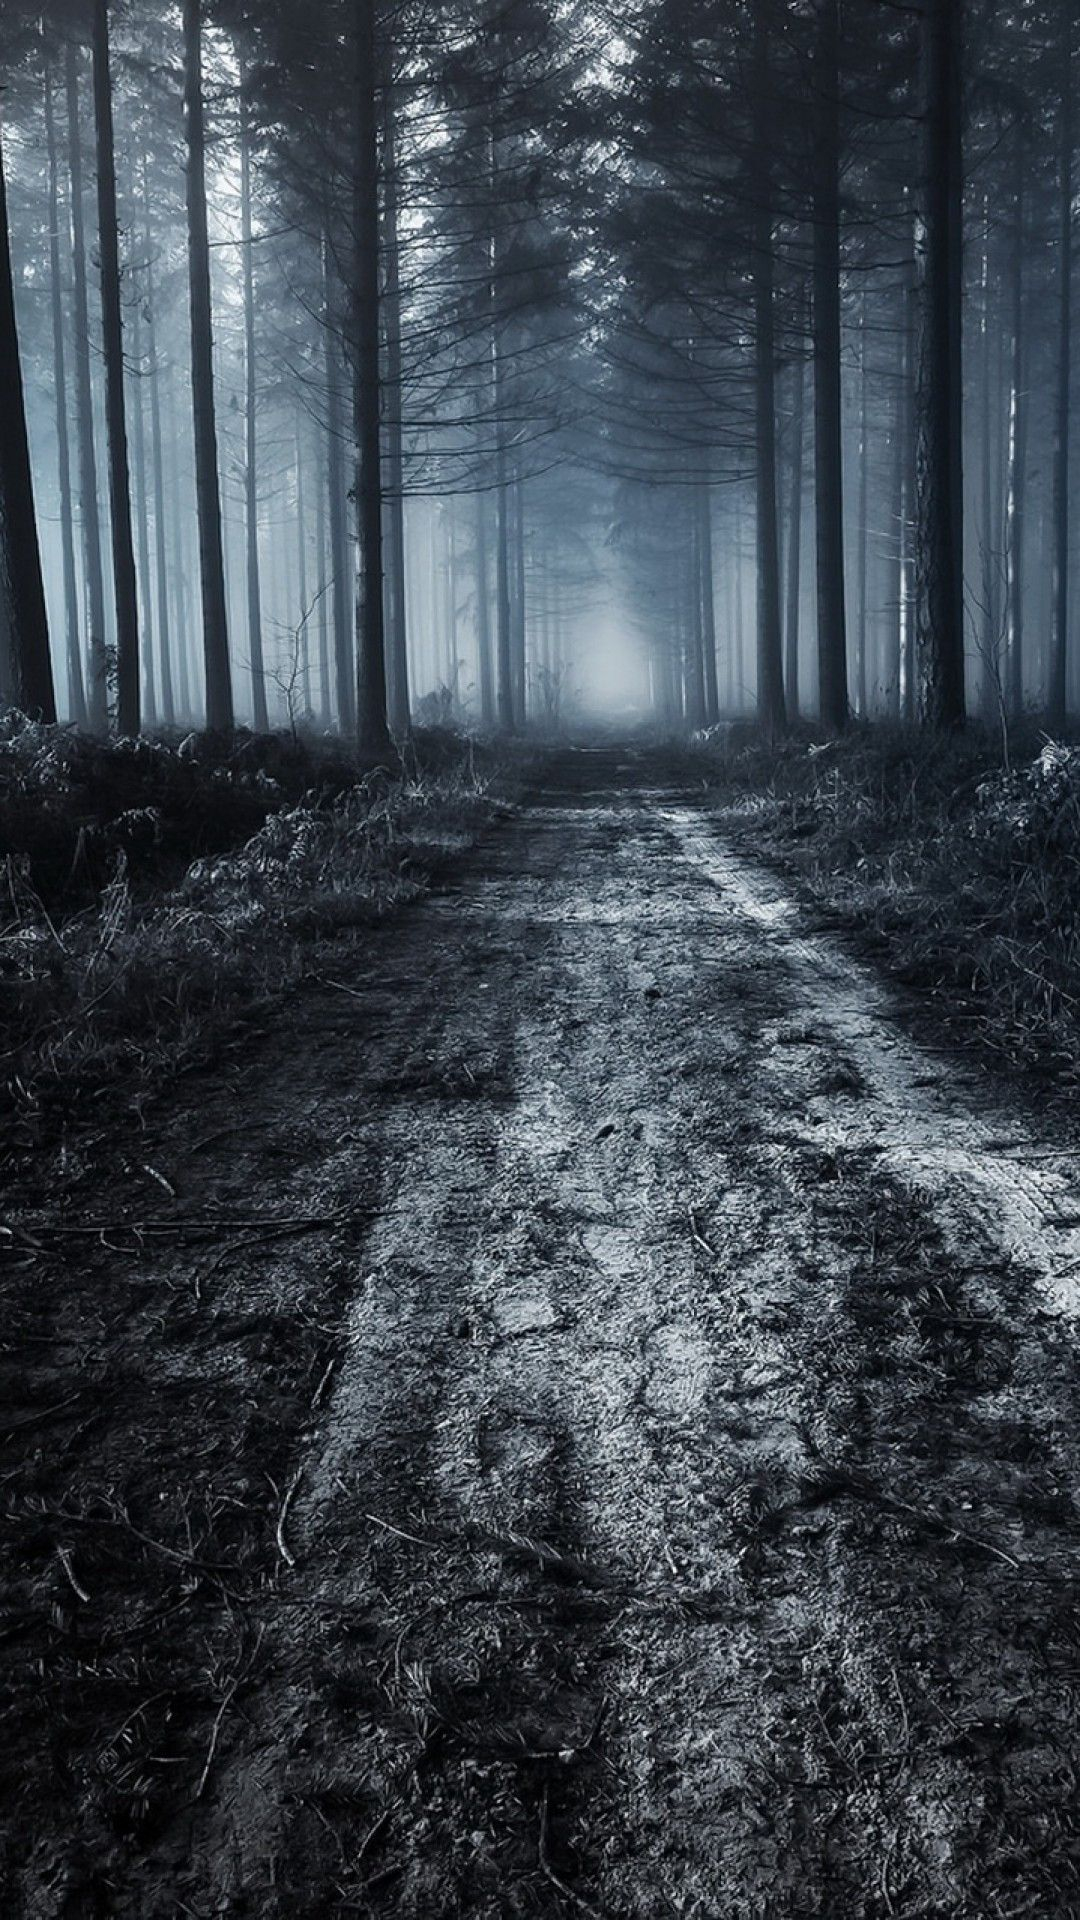 1080x1920 Scary Forest Wallpapers 09 Best Free Scary Forest Hd Wallpaper For Pc | Scary woods, Hd dark wallpapers, Forest wallpaper